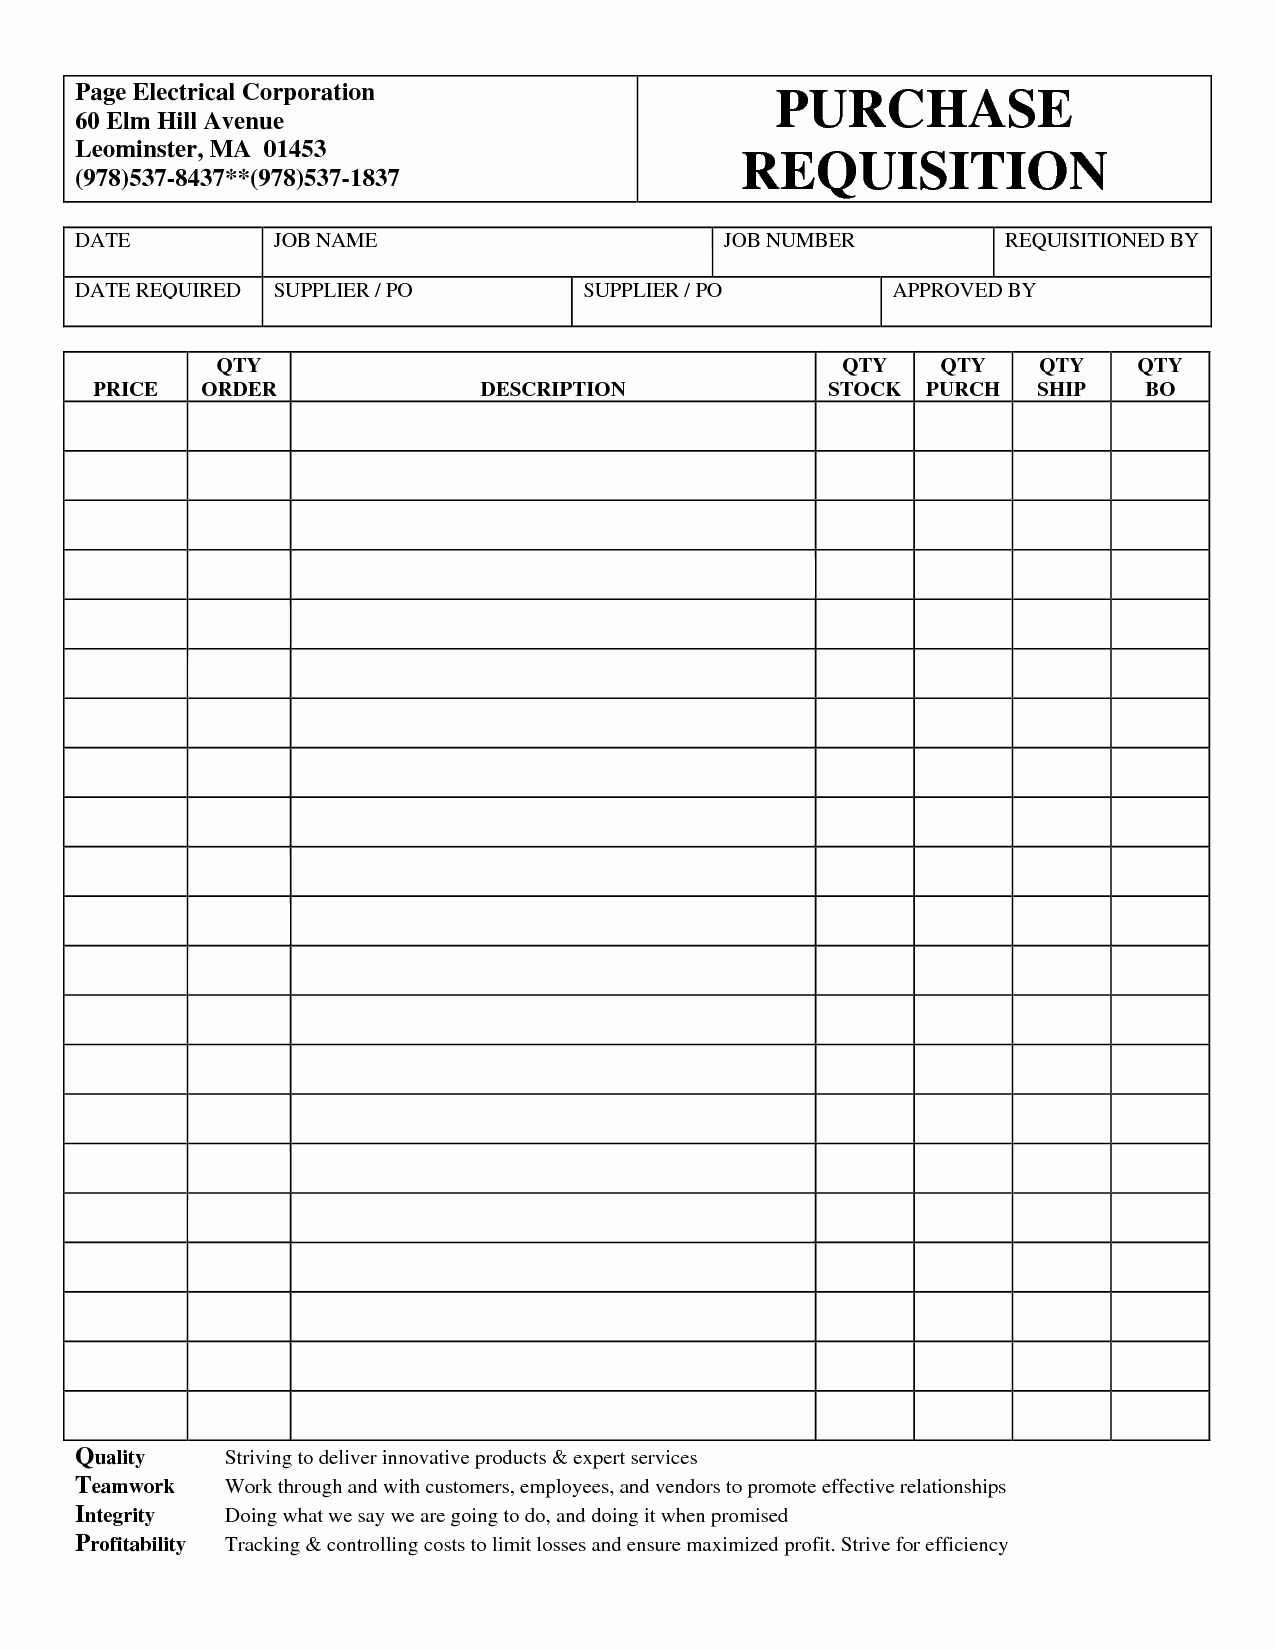 Purchasing Request form Template Fresh Best S Of Purchase Request form Template Excel